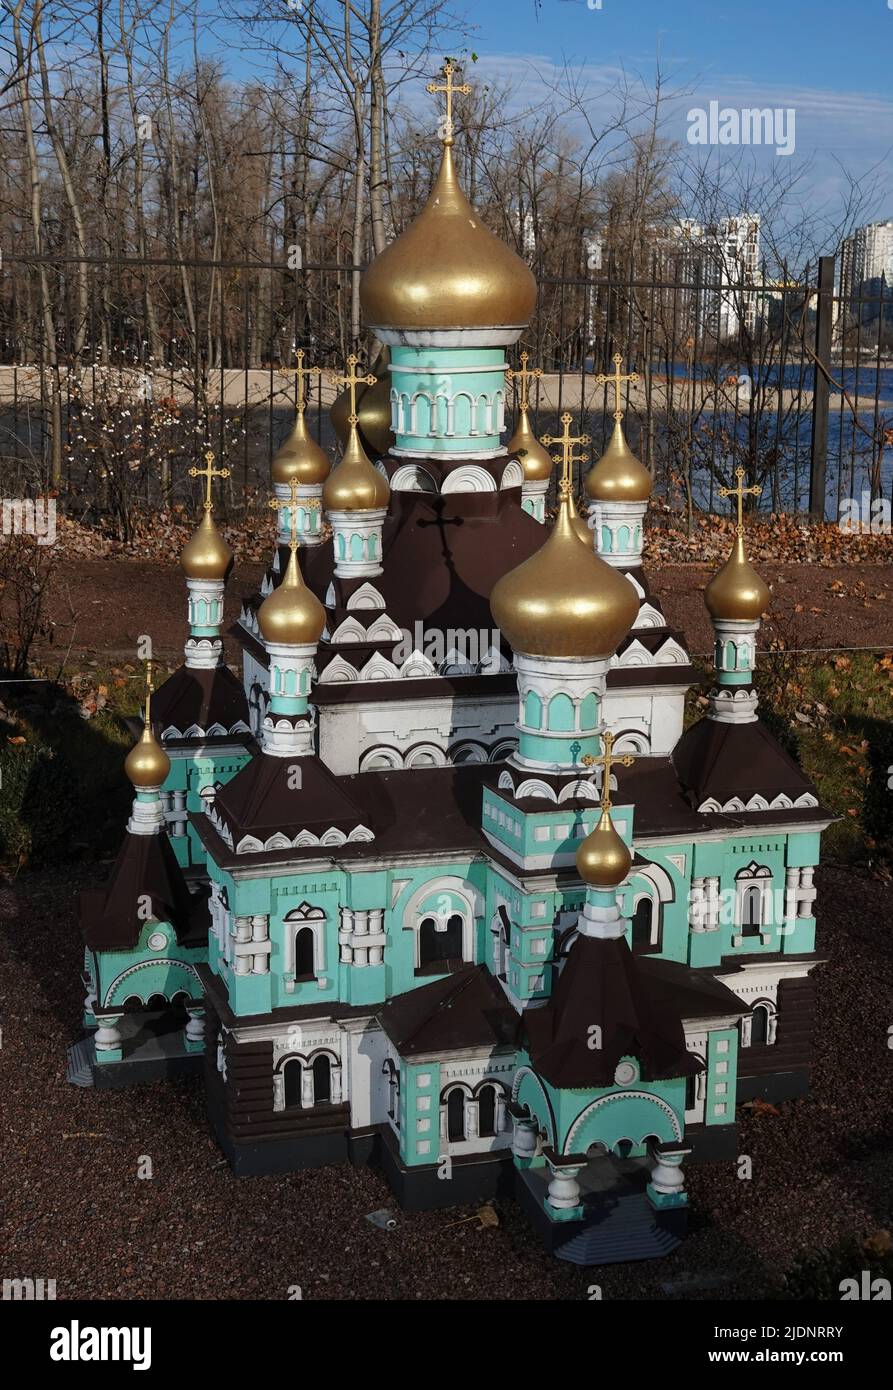 Kiev, Ukraine November 11, 2021: Museum of Miniatures - a miniature building of the Holy Intercession Convent in the city of Kiev Stock Photo